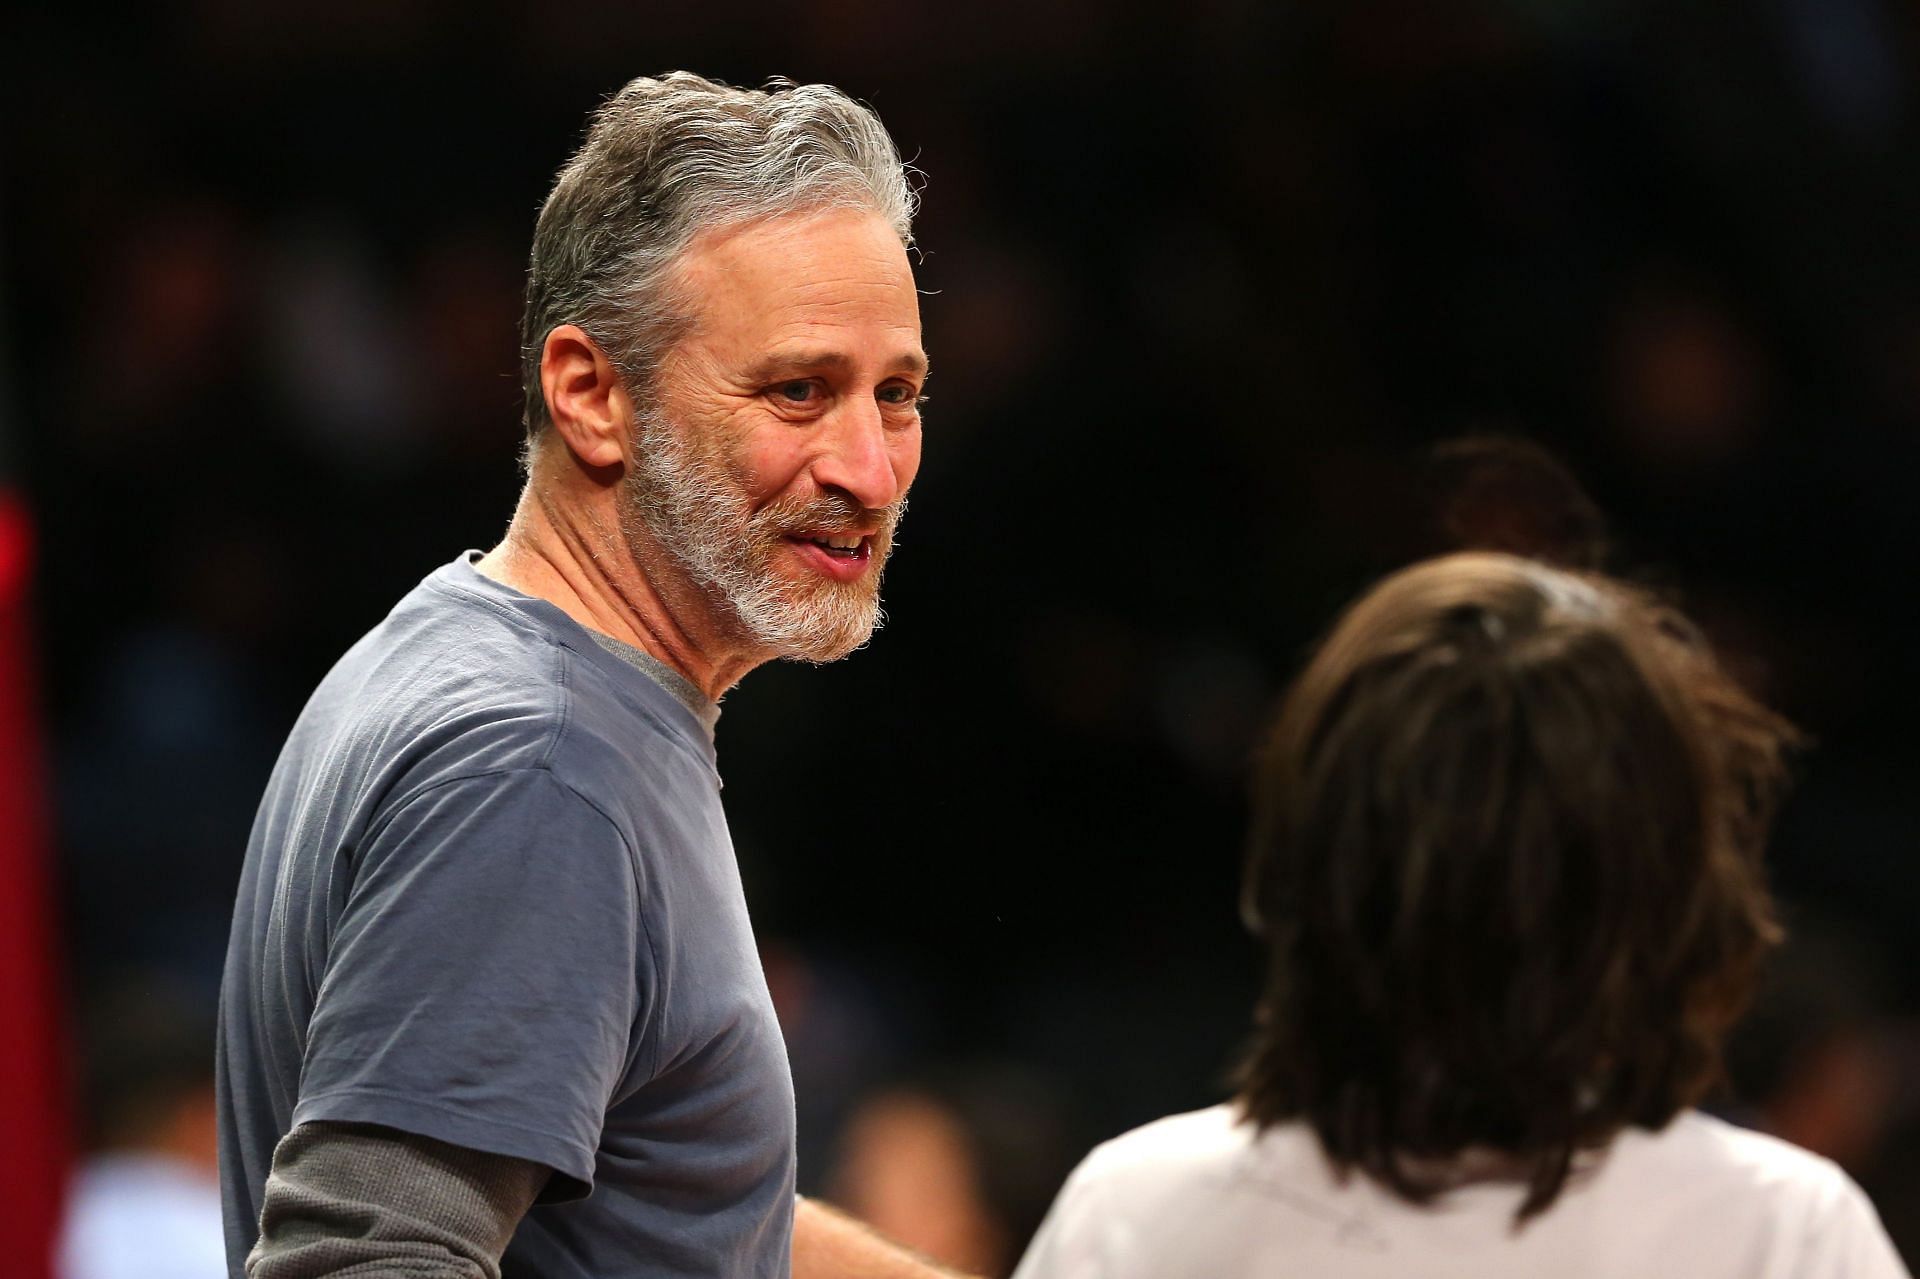 Comedian and ex-&#039;Daily Show&#039; host Jon Stewart